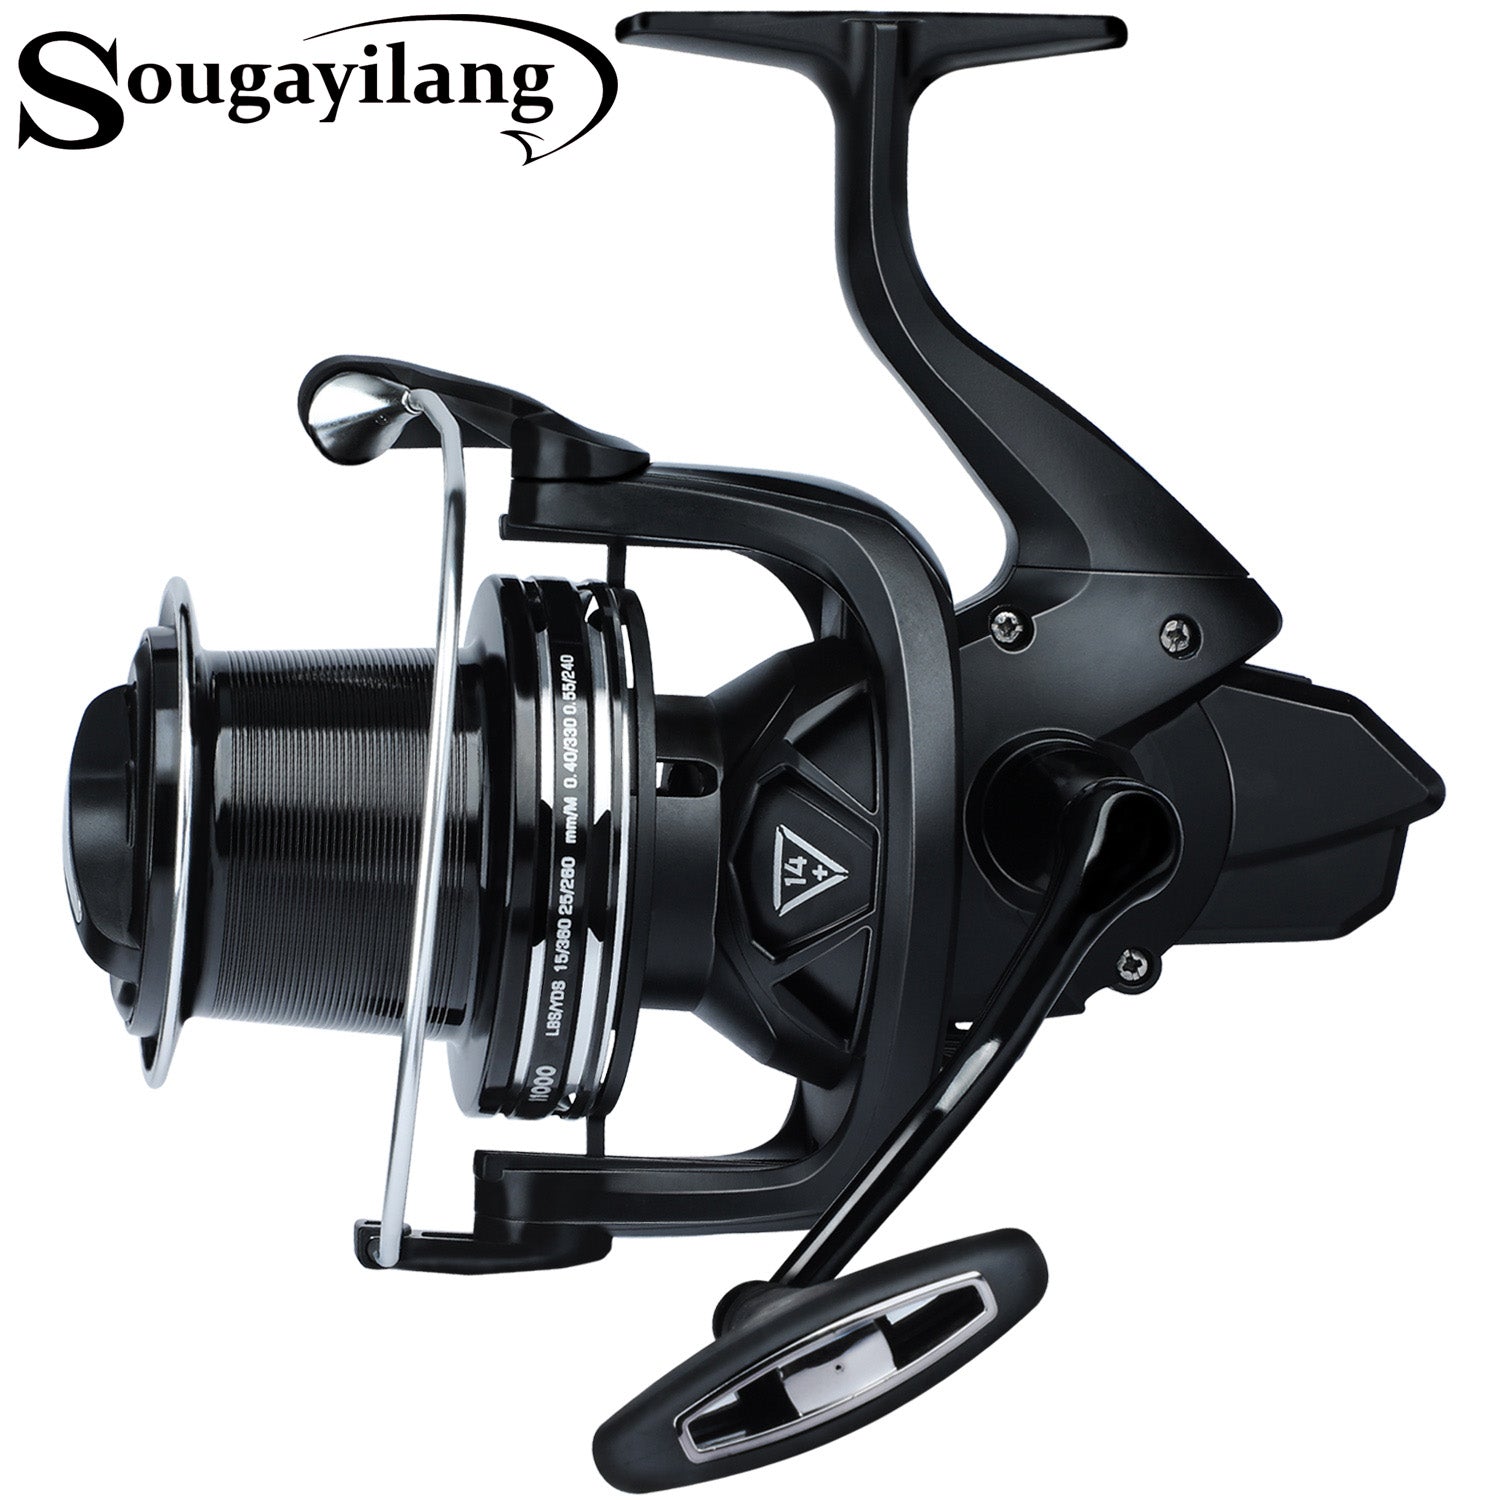  THKFISH Saltwater Spinning Reel 10000 Surf Fishing Reels  Saltwater,13 +1 BB,45LB Max Drag,Ultra Smooth Heavy Duty Reel with CNC  Aluminum Spool Reels for Long Cast : Sports & Outdoors